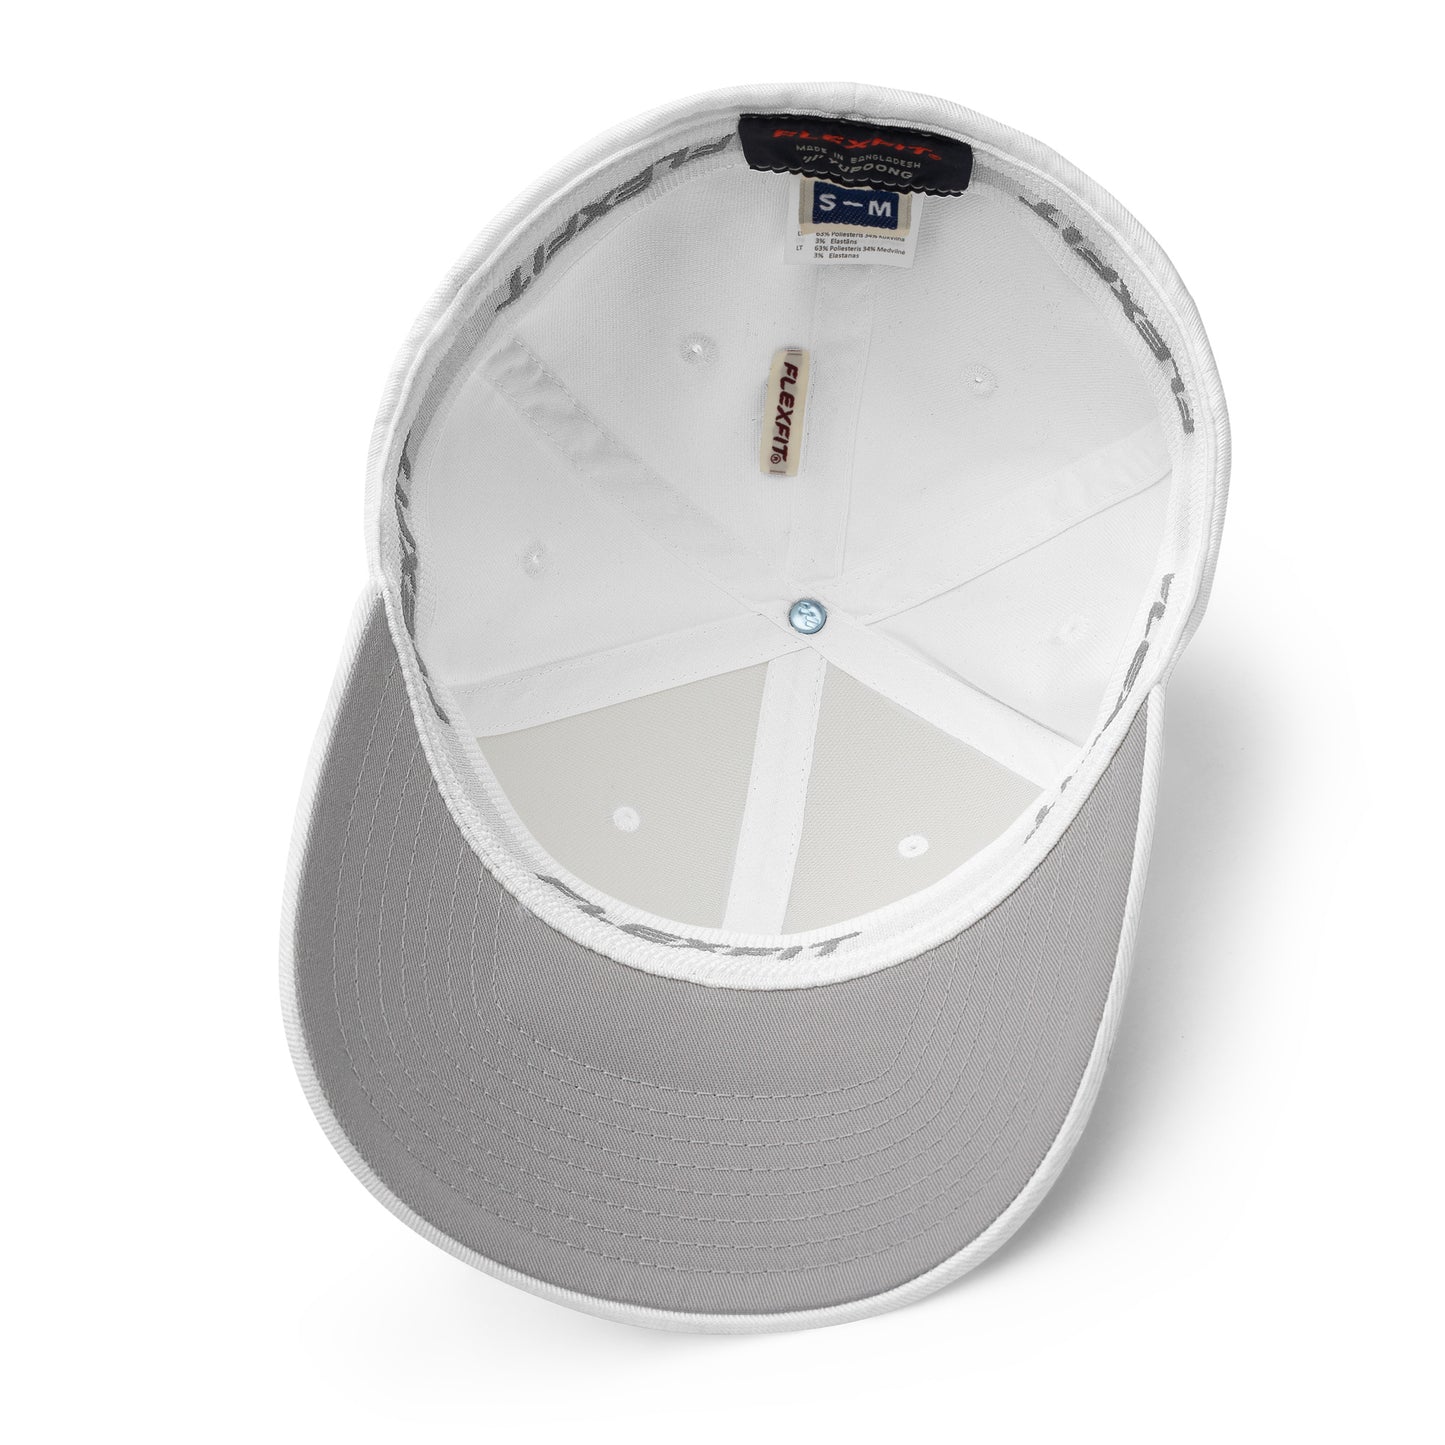 Bottom view of Gallatin Mountain Range in Gallatin National Forest Montana White Men's Structured Hat from Park Attire